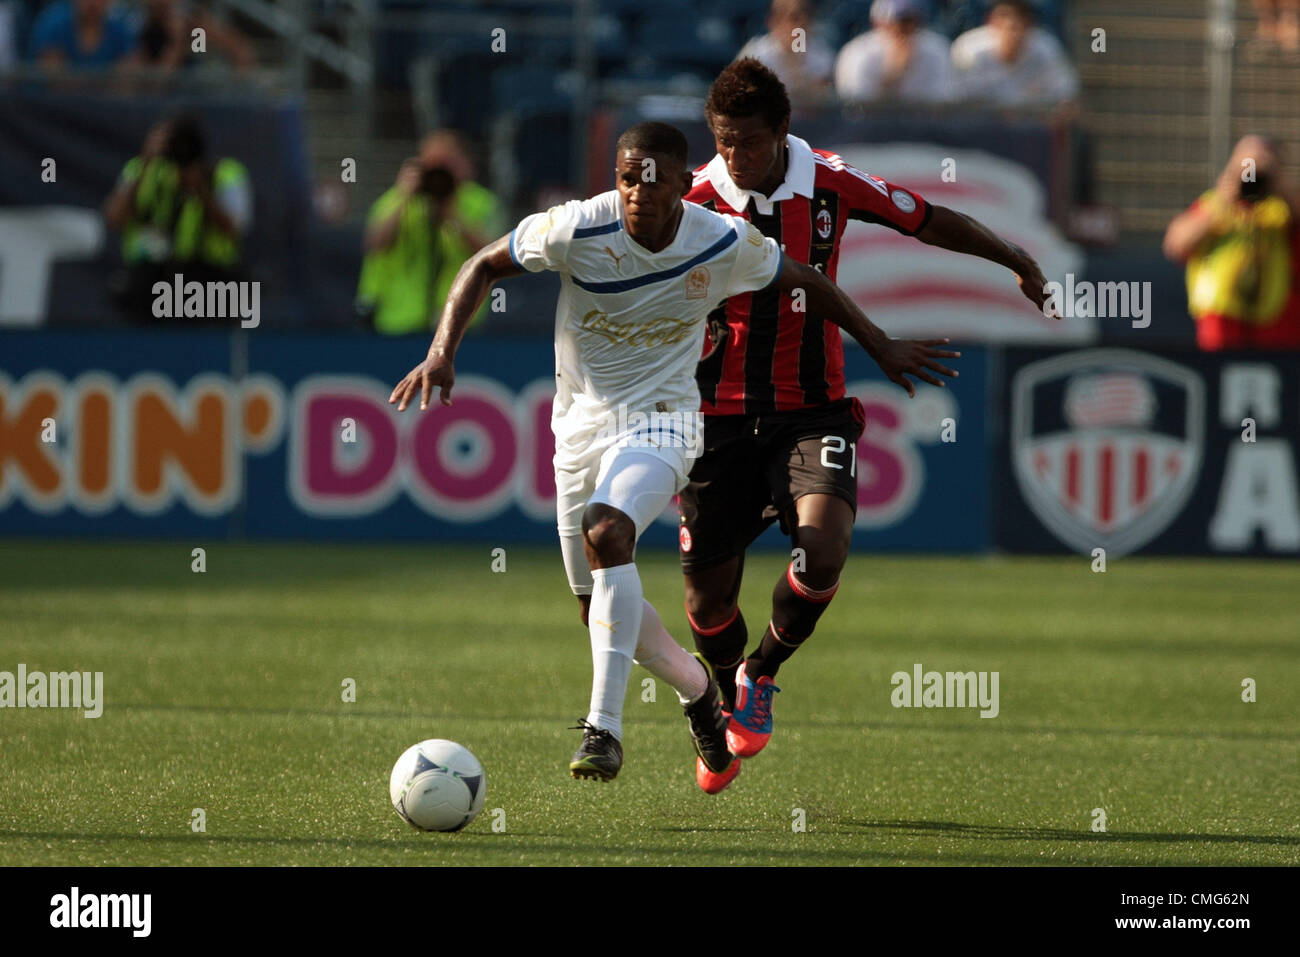 04.08.2012. Massachusetts , USA.  CD Olimpia's Fabio de Souza (4) breaks away from AC Milan's Kevin Constant (21). AC Milan played CD Olimpia at Gillette Stadium in Foxborough, Massachusetts  on August 4, 2012. Stock Photo